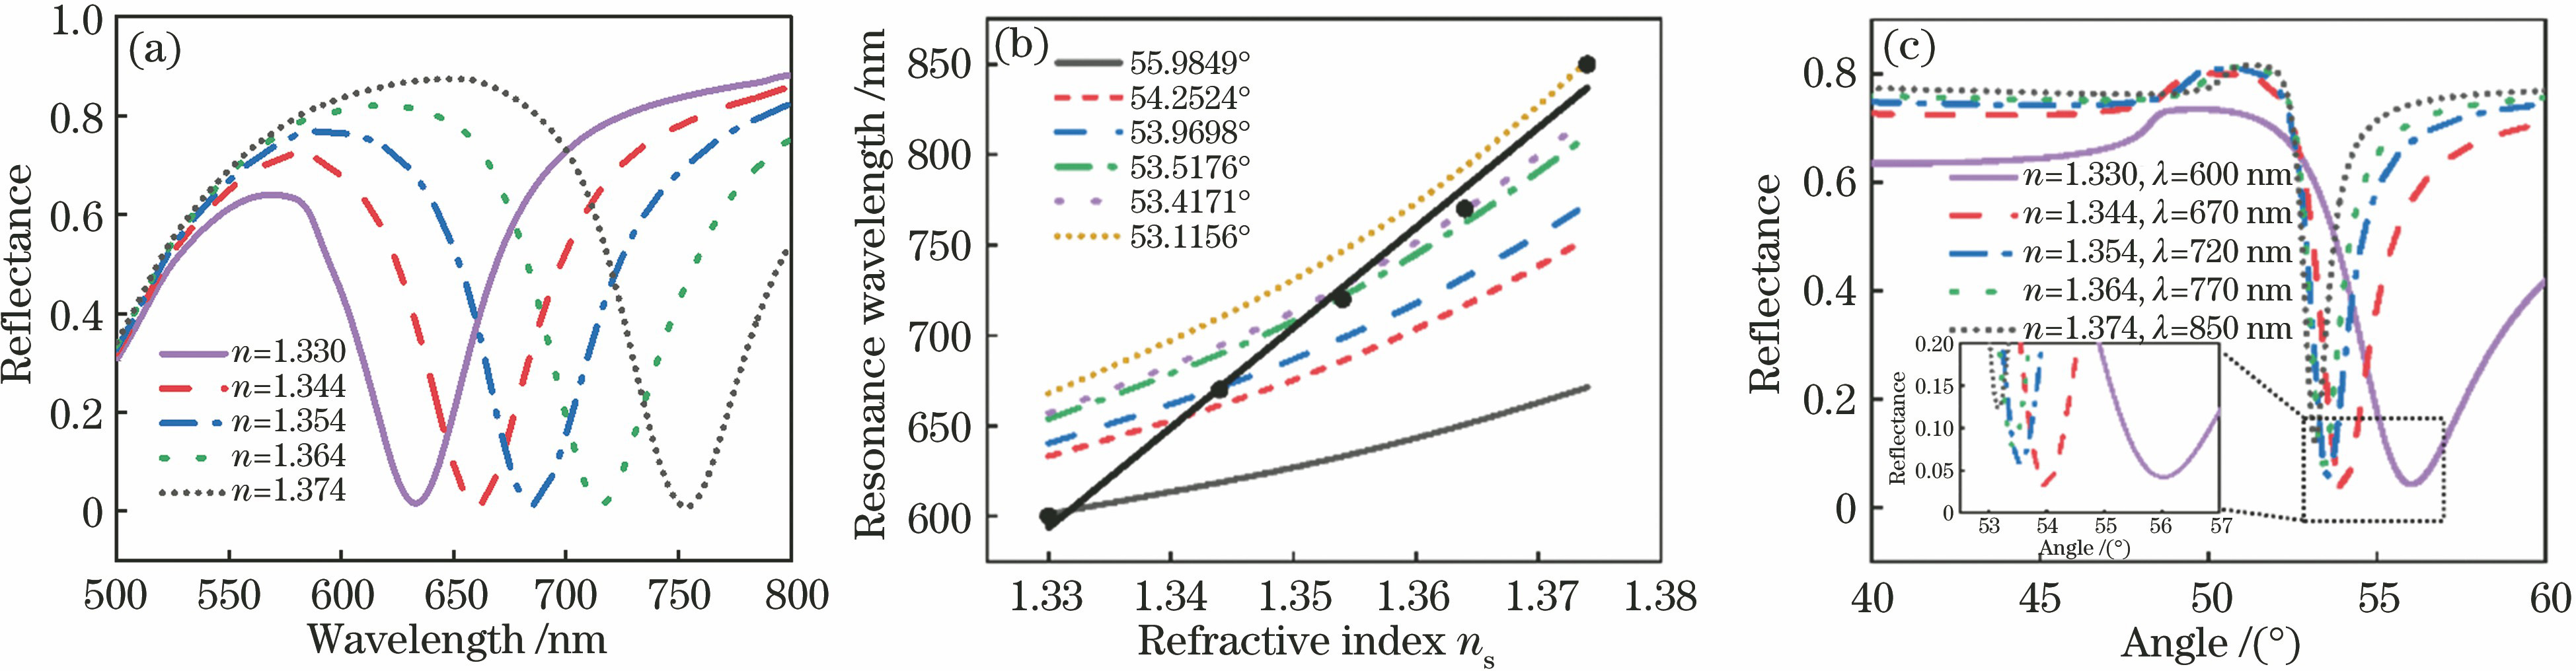 Simulated relationship curves between refractive index and SPR wavelength when changing excitation angles. (a) SPR reflectance spectra of different dielectric refractive index for excitation angle of 54.2524°; (b) relationship between resonance wavelength and refractive index of dielectric under different excitation angles (fitting line represents the maximum sensitivity and detection range); (c) normalized reflectance varying with angle under different resonance wavelengths and refractive indexes